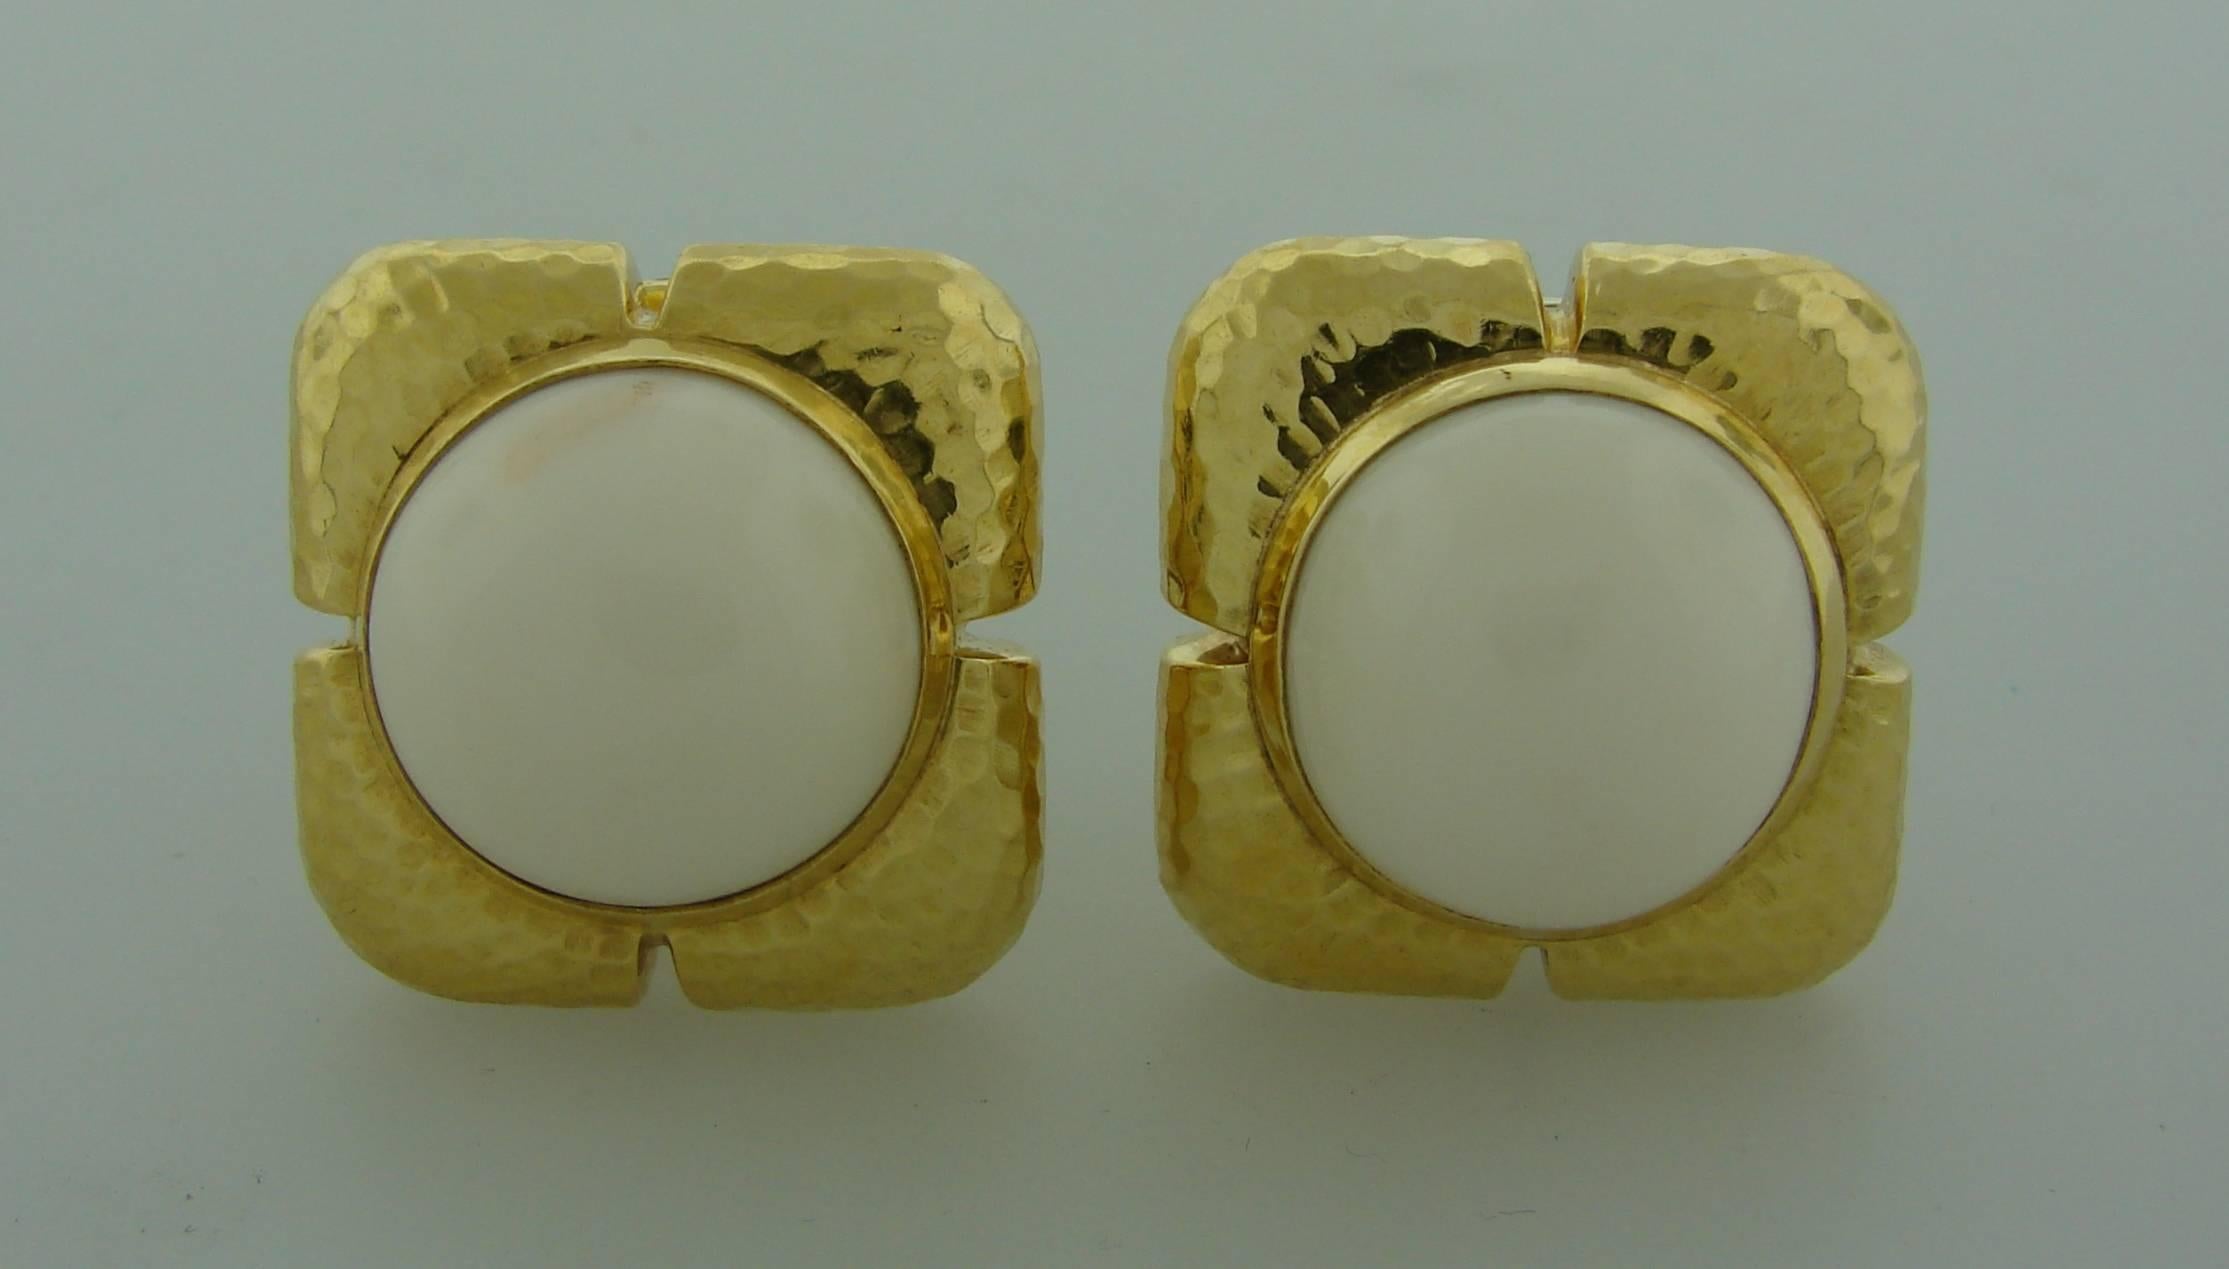 Bold yet elegant earrings created by Andrew Clunn in the 1980's. Feature round cabochon angel skin coral set in hand-hammered 18k yellow gold frame.
The earrings measure almost 1